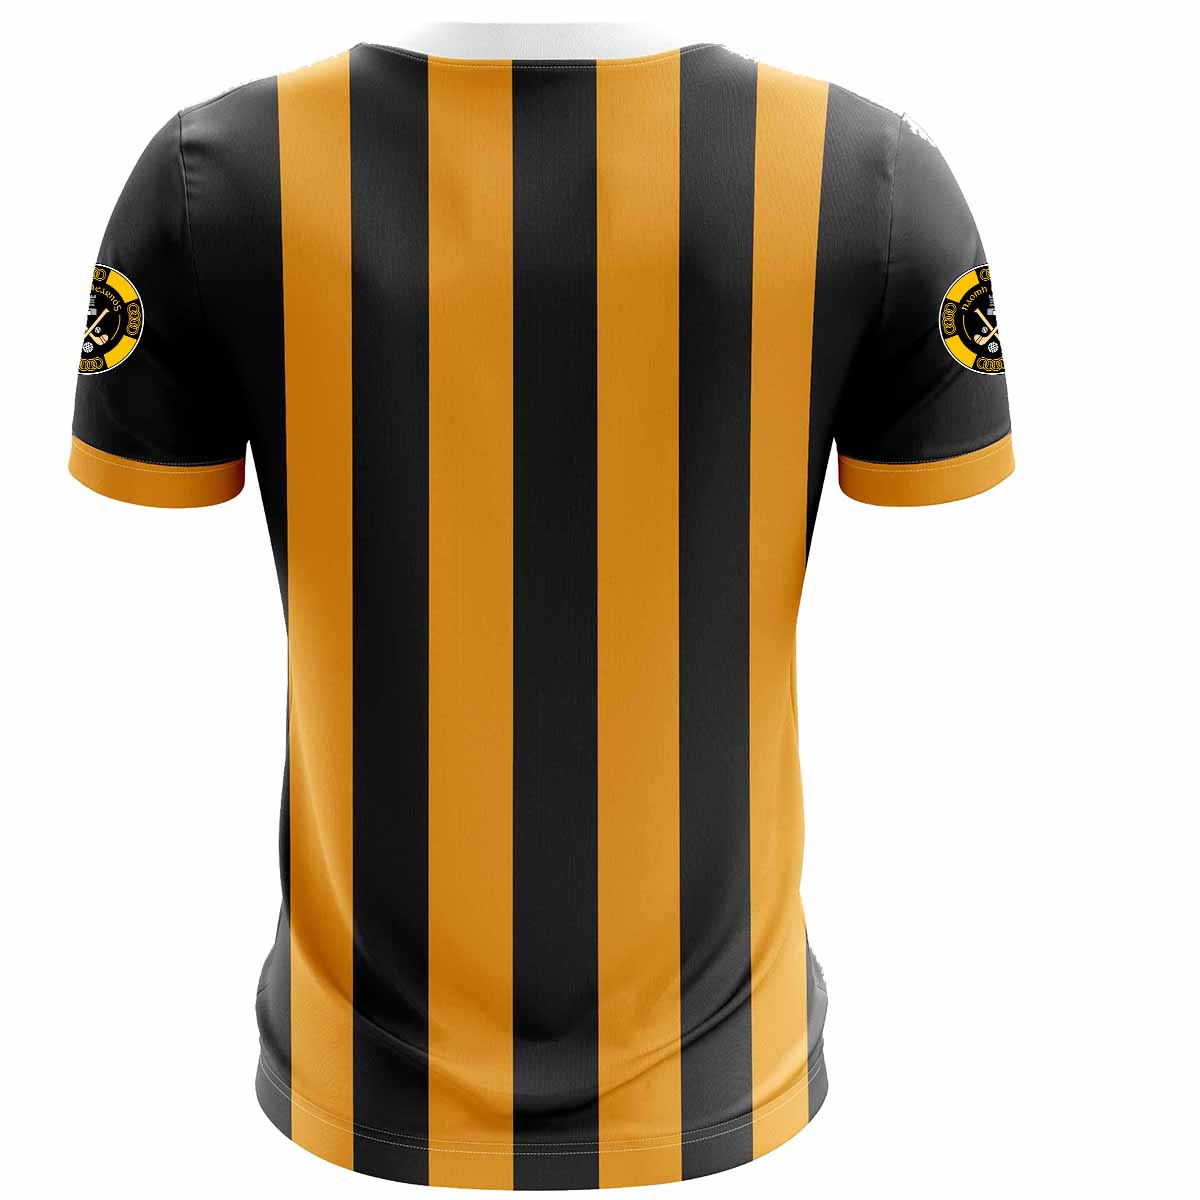 Mc Keever Naomh Mearnog CLG Playing Jersey - Adult - Black/Amber Player Fit